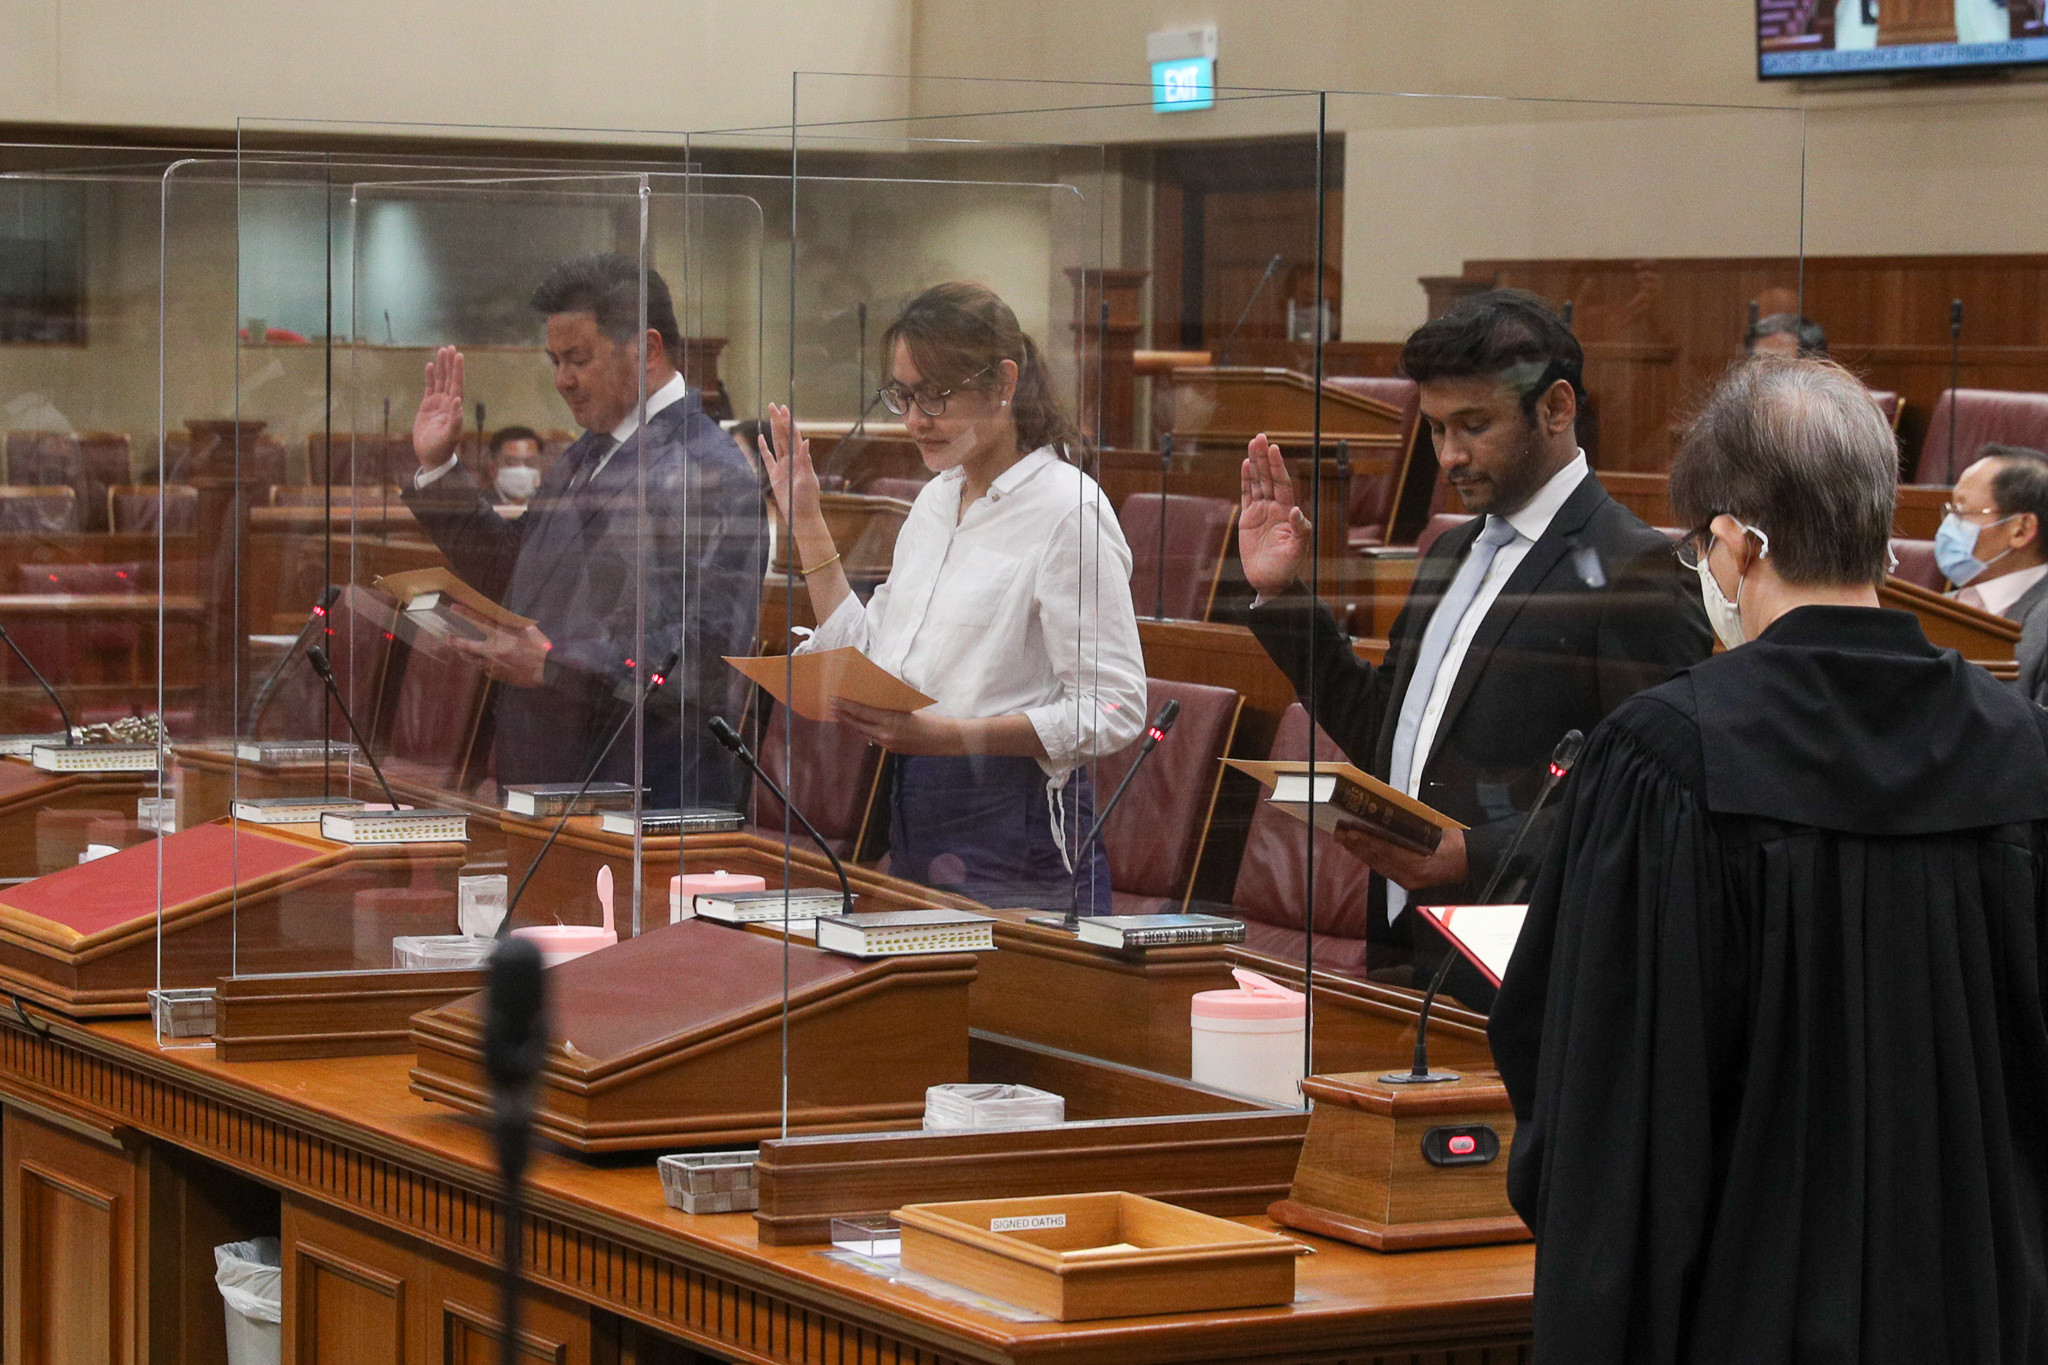 NMP Oath-Taking in Chamber